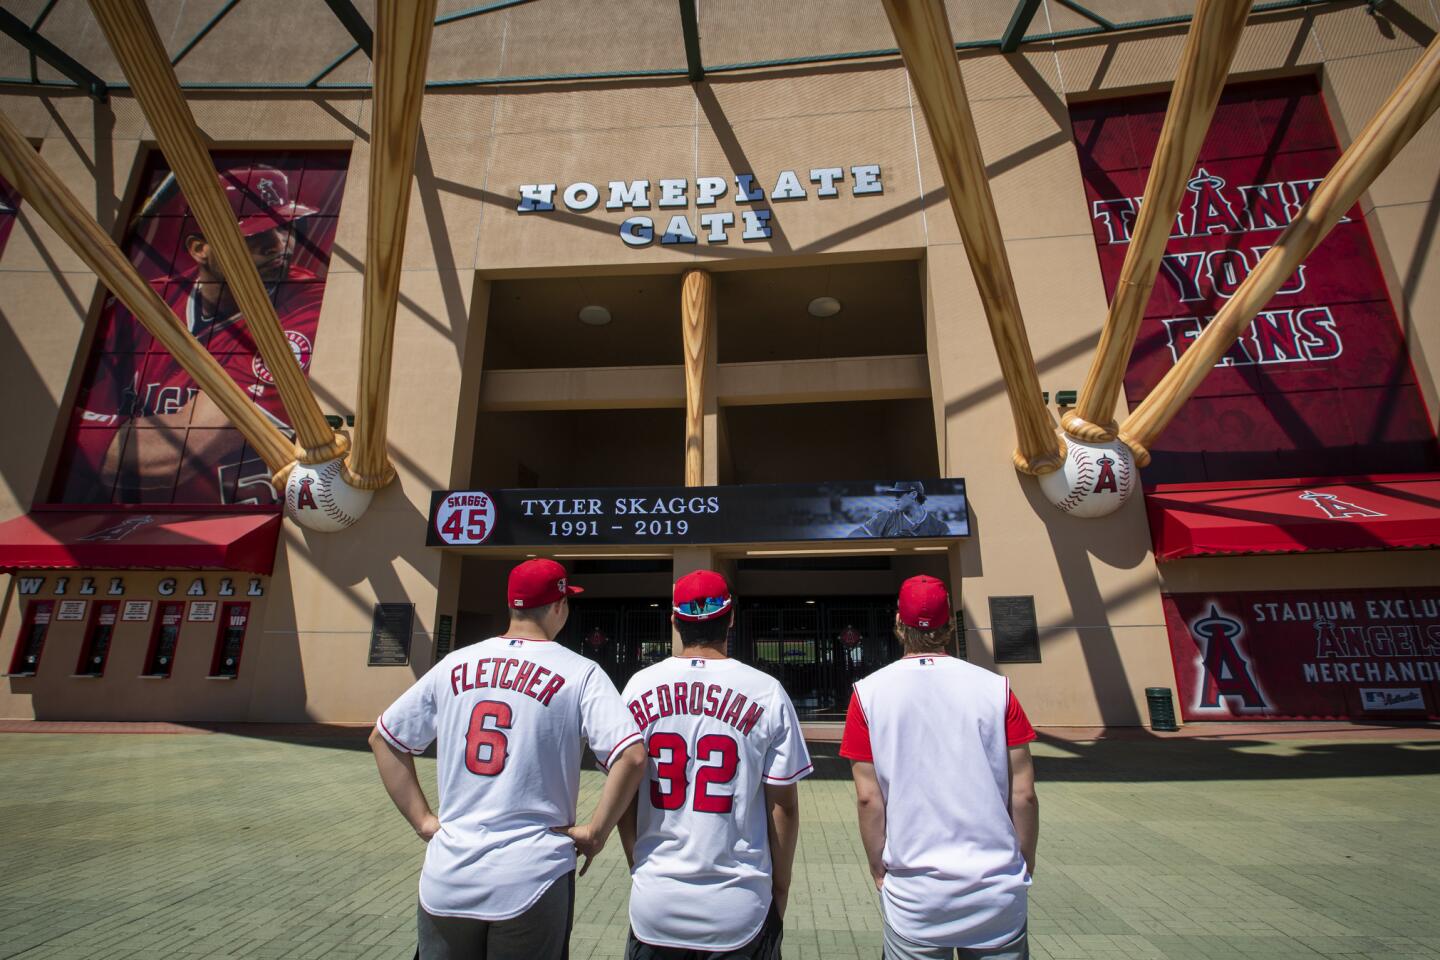 Angels fans Reza Agahi, 18, left, William St. Marseille, 18, center, and Grant Gaynor, 18, all of Anaheim, spend a quiet moment looking at a sign and growing memorial for Tyler Skaggs at Angel Stadium.